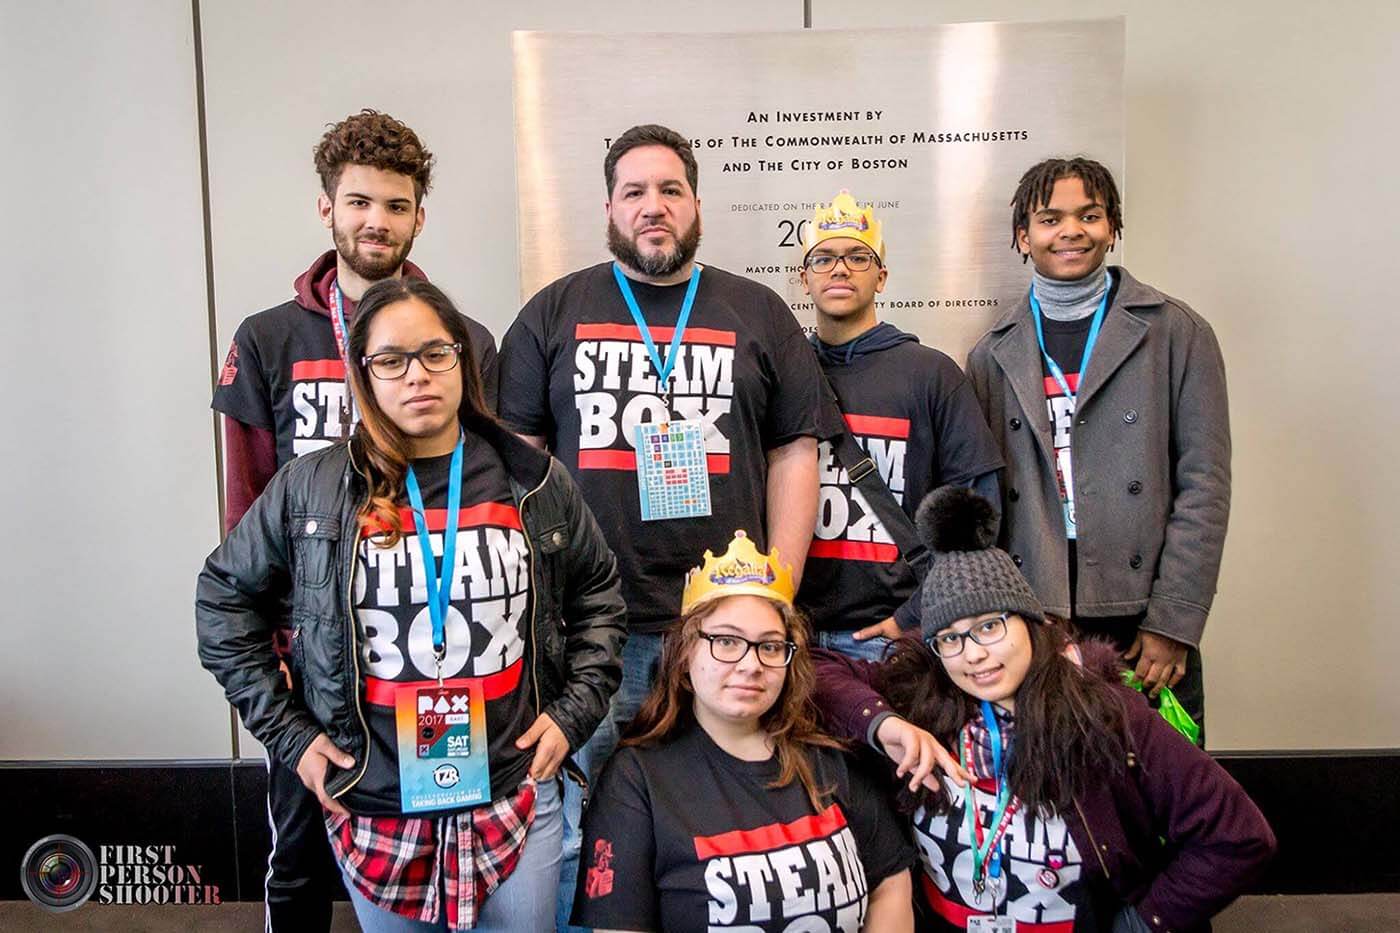 Students with Steam Box T-shirts